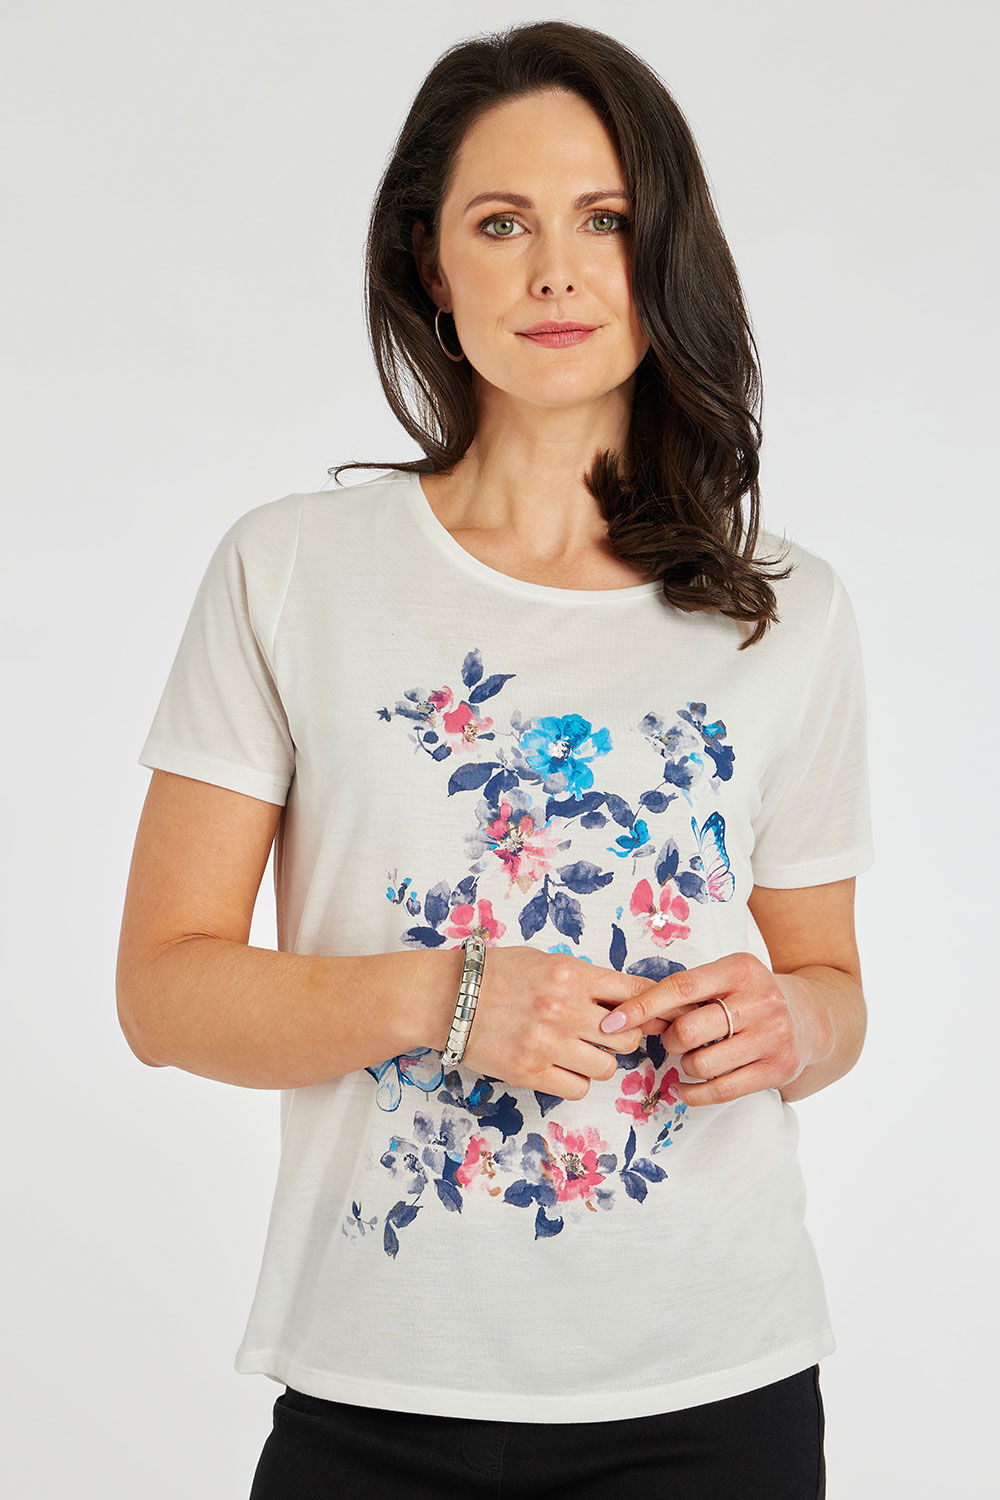 Bonmarche Women’s Cream And Blue Casual Short Sleeve Floral Butterfly Print T-Shirt, Size: 14